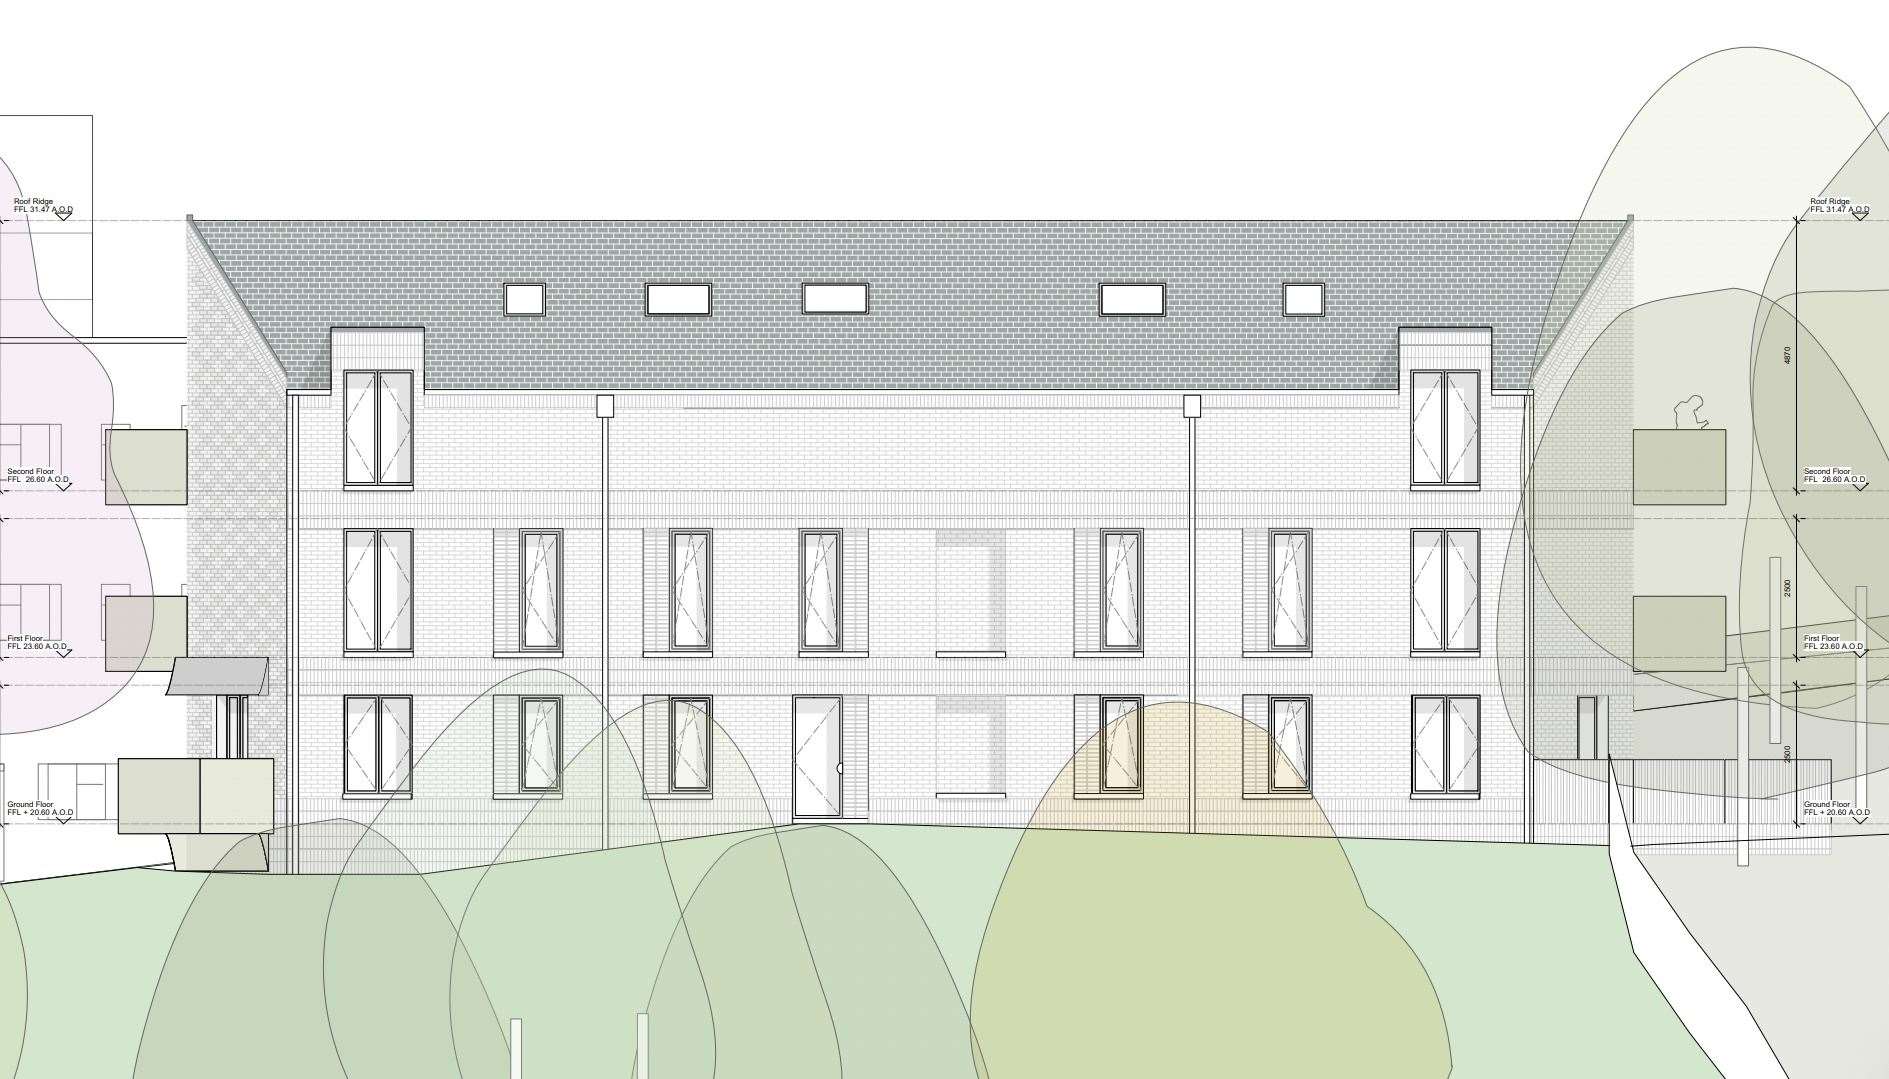 How the new apartment block could look. Picture: Dover District Council planning portal